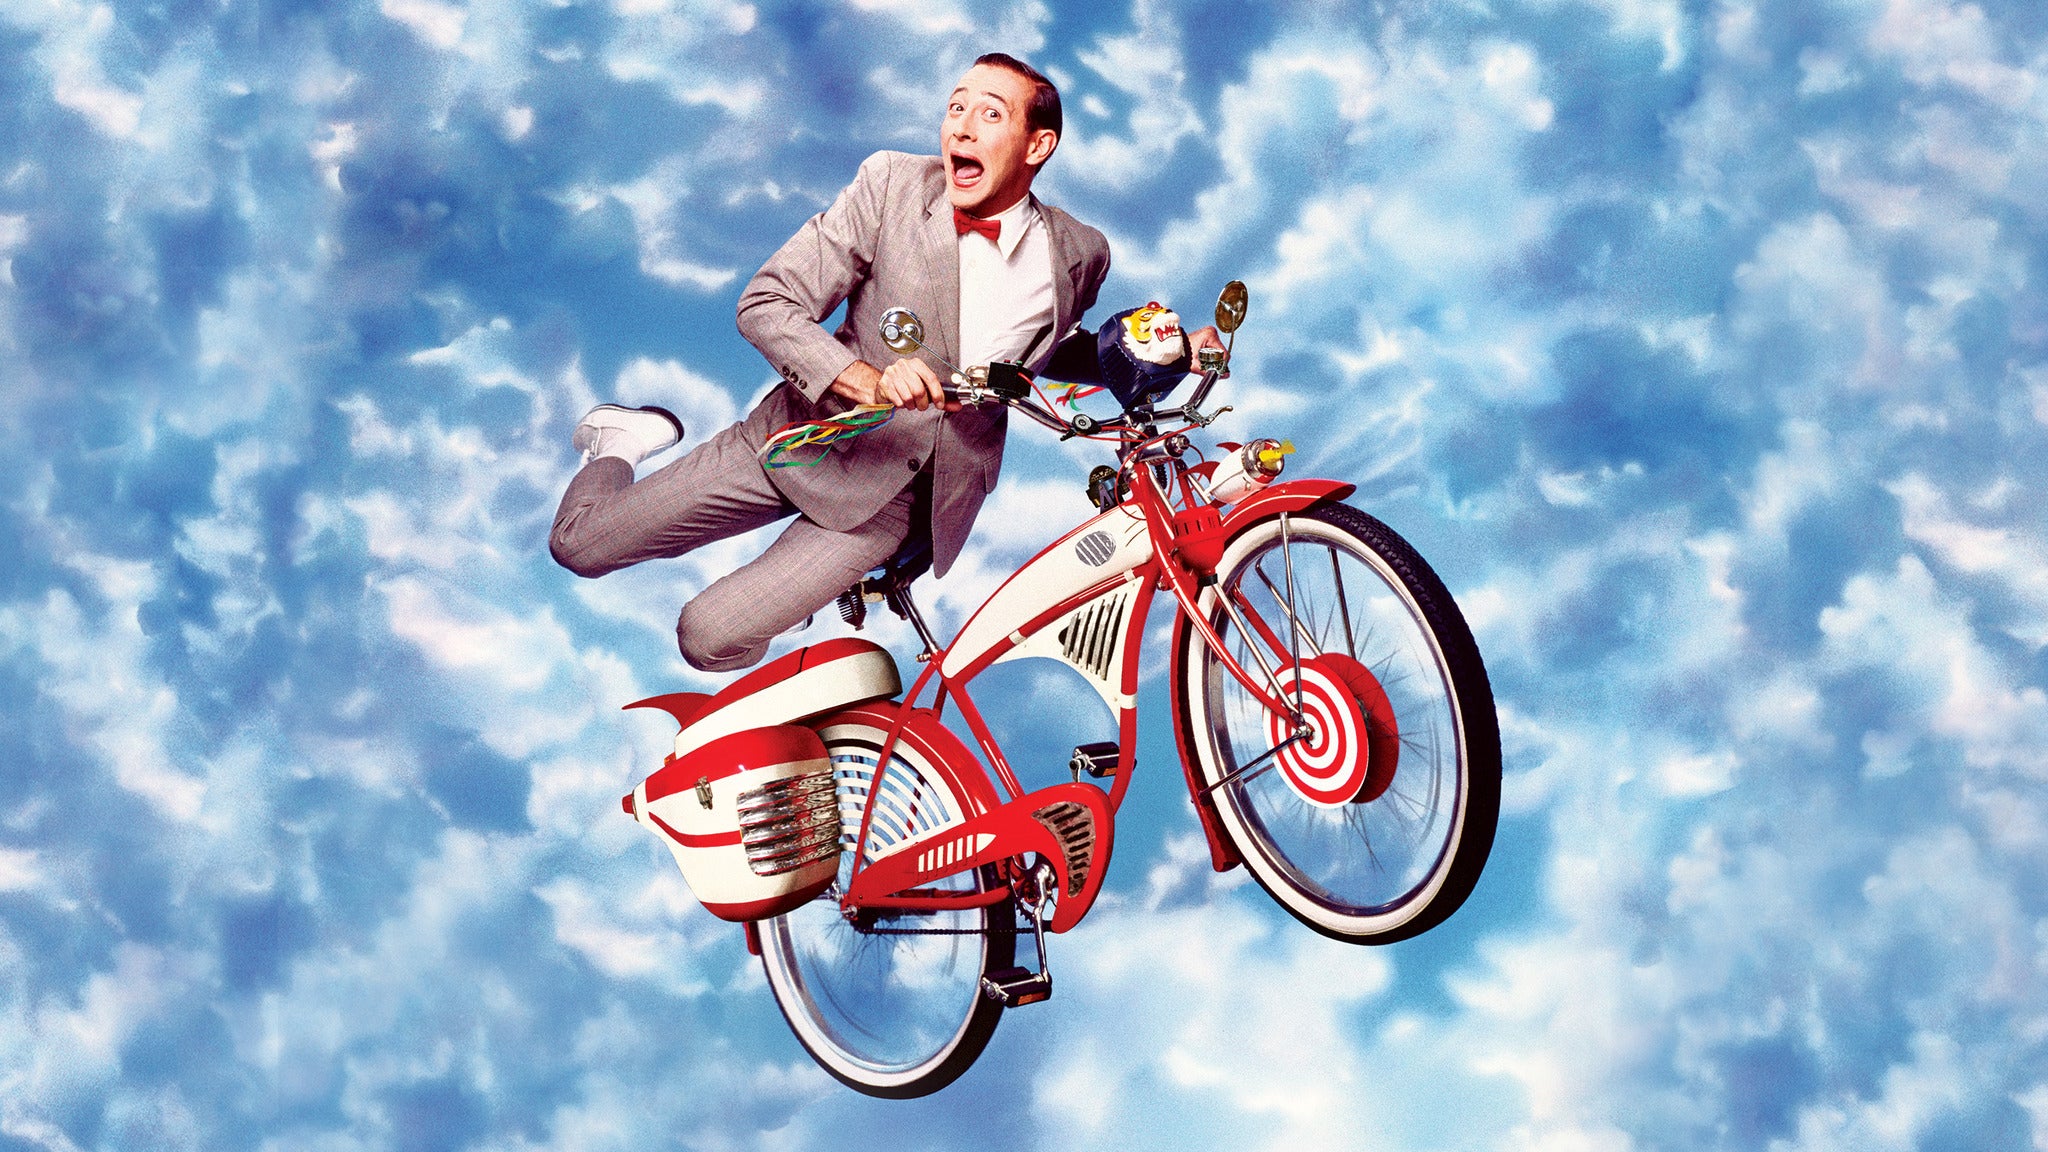 Pee-wee's Big Adventure 35th Anniversary Tour with Paul Reubens in New York promo photo for Official Platinum presale offer code